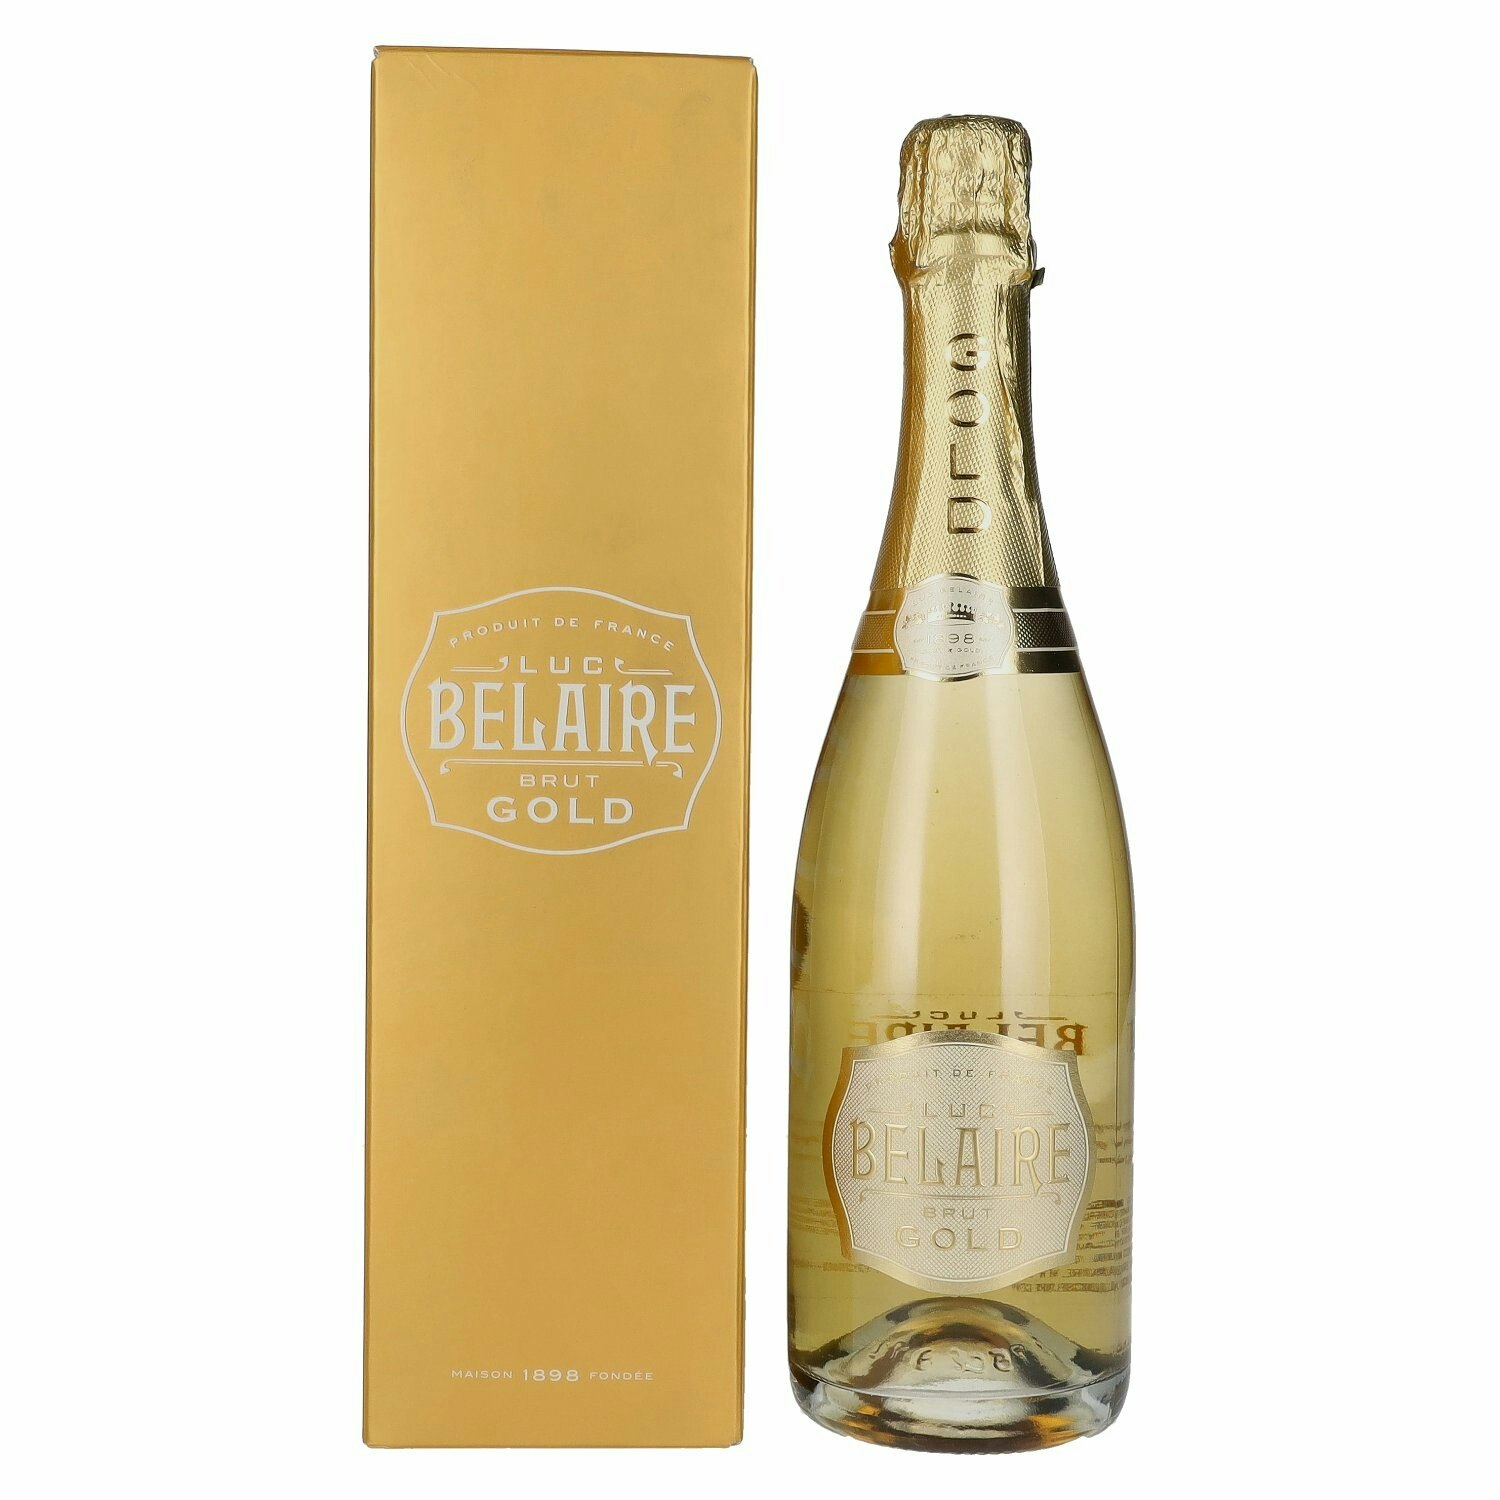 Luc Belaire GOLD Brut 12,5% Vol. 0,75l in Giftbox